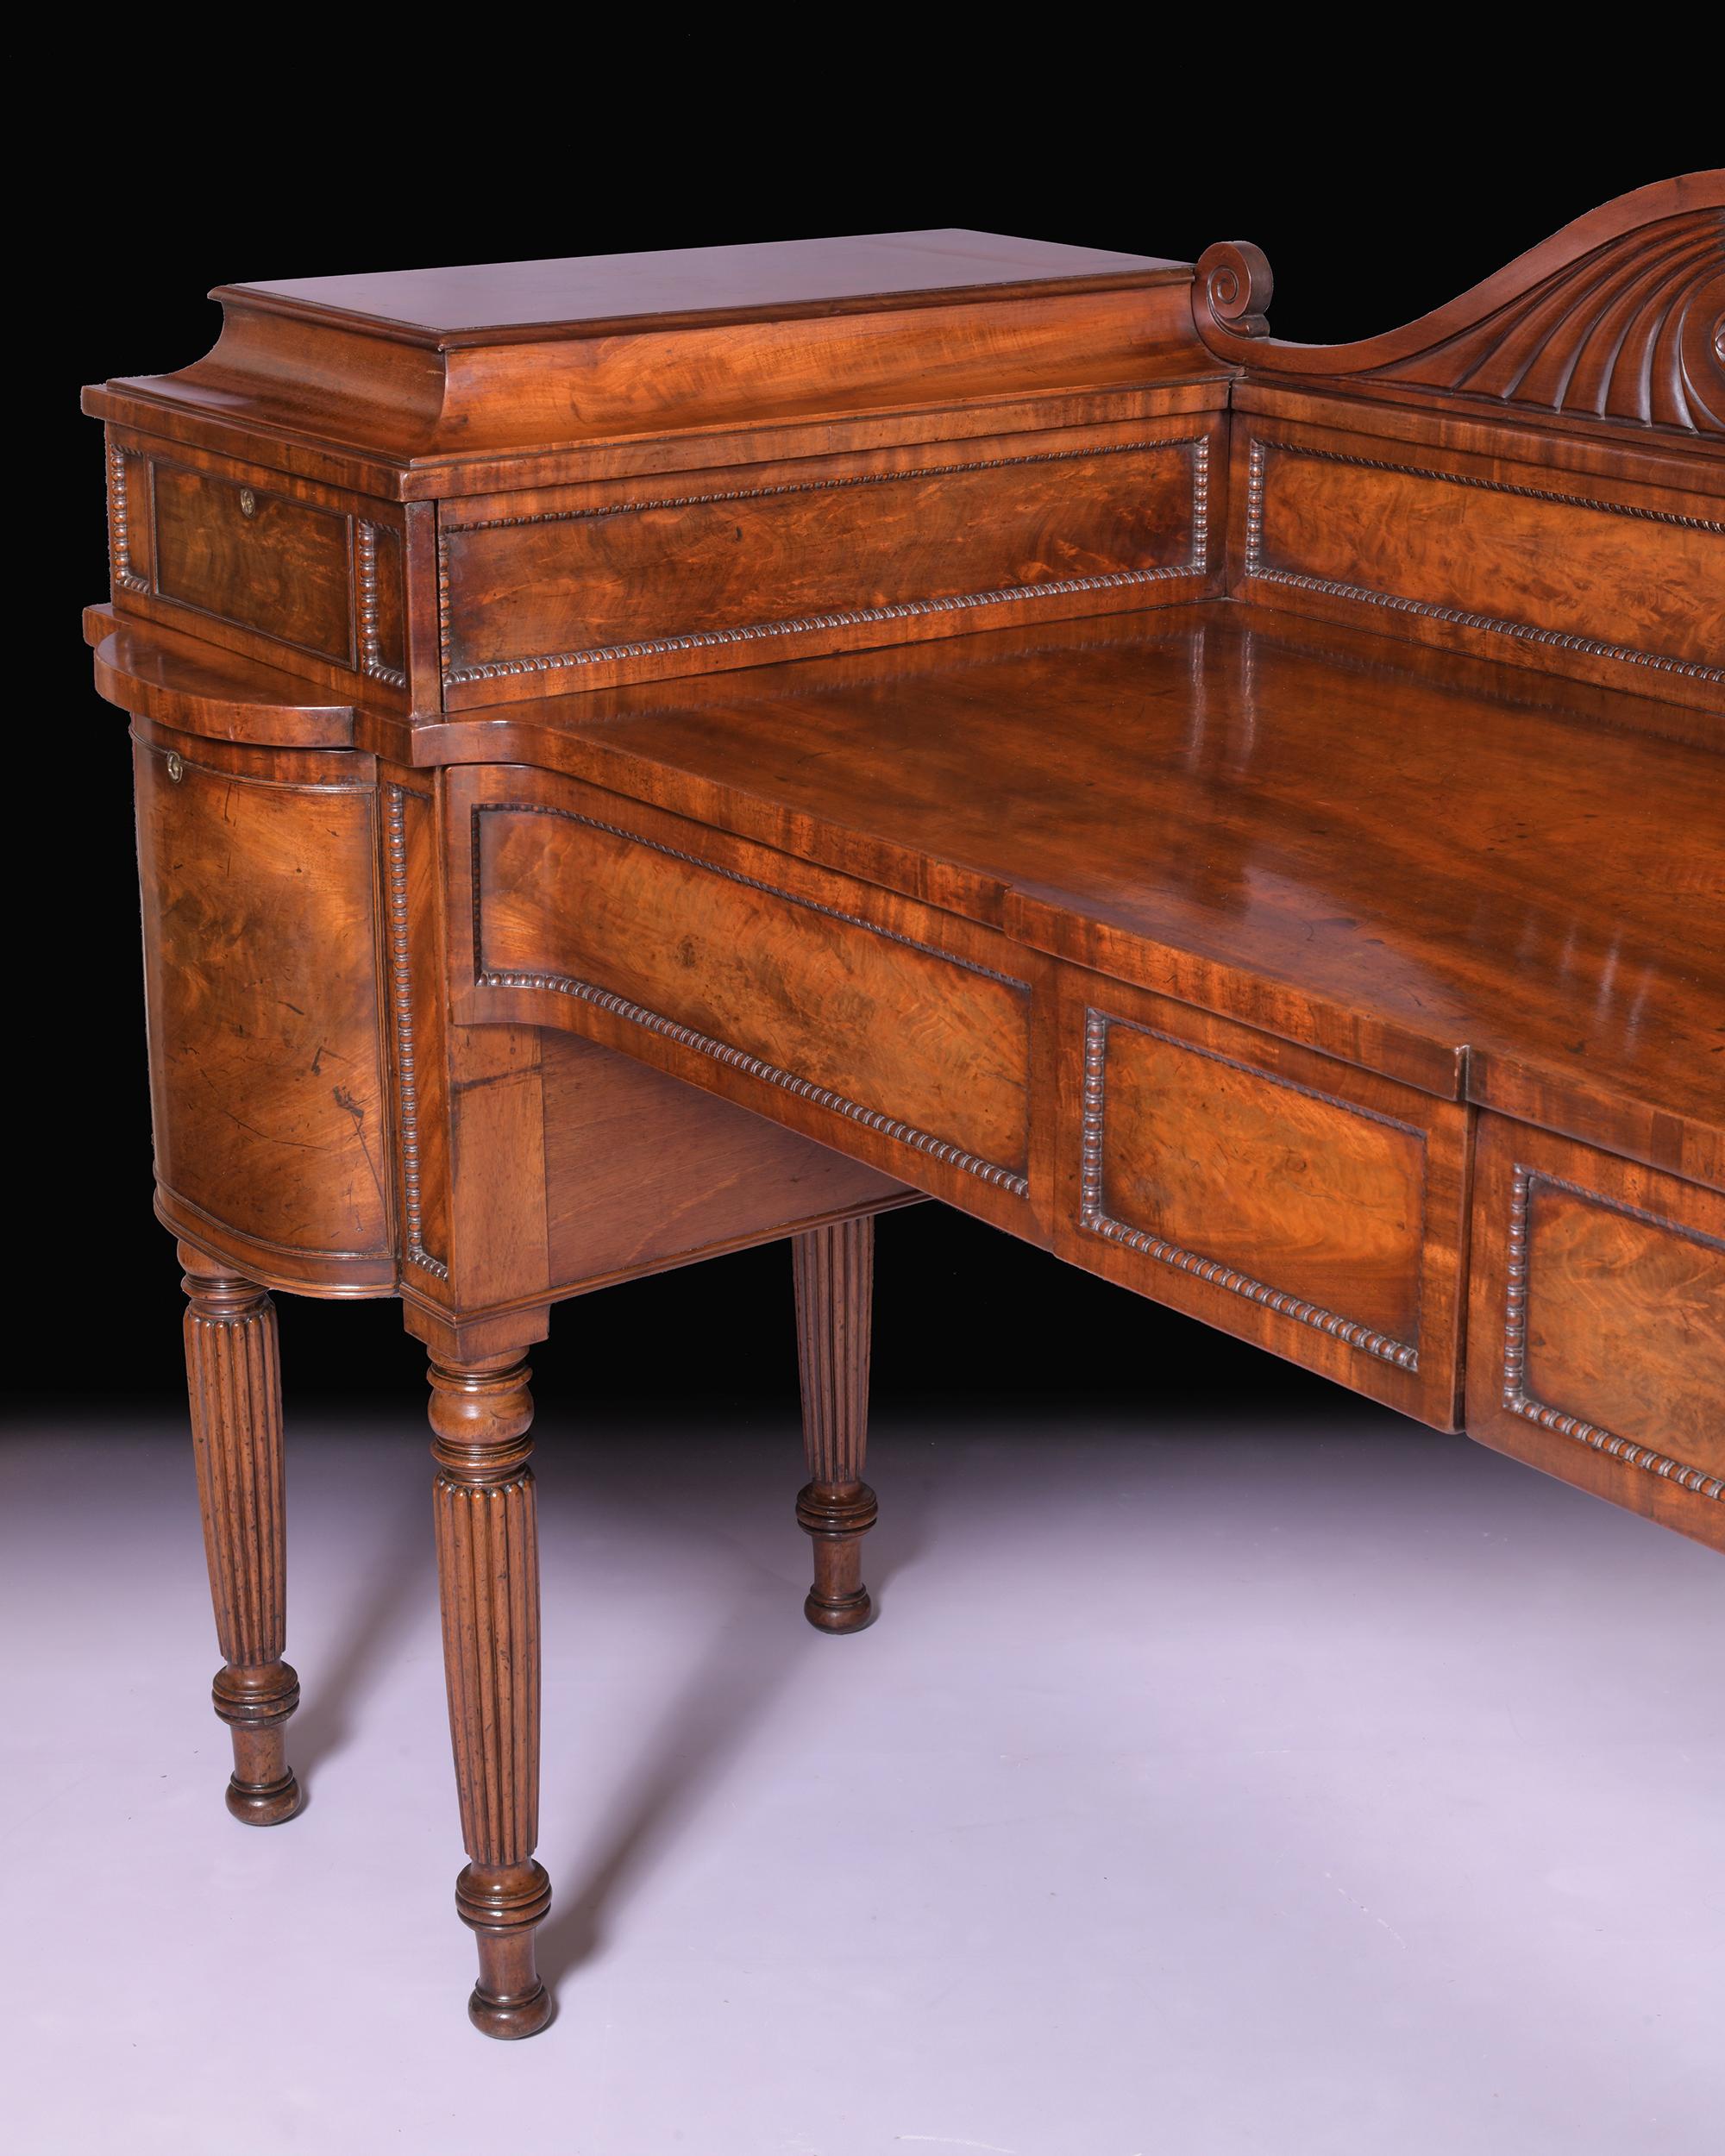 Early 19th Century English Regency Mahogany Sideboard in the Manner of Gillows For Sale 5